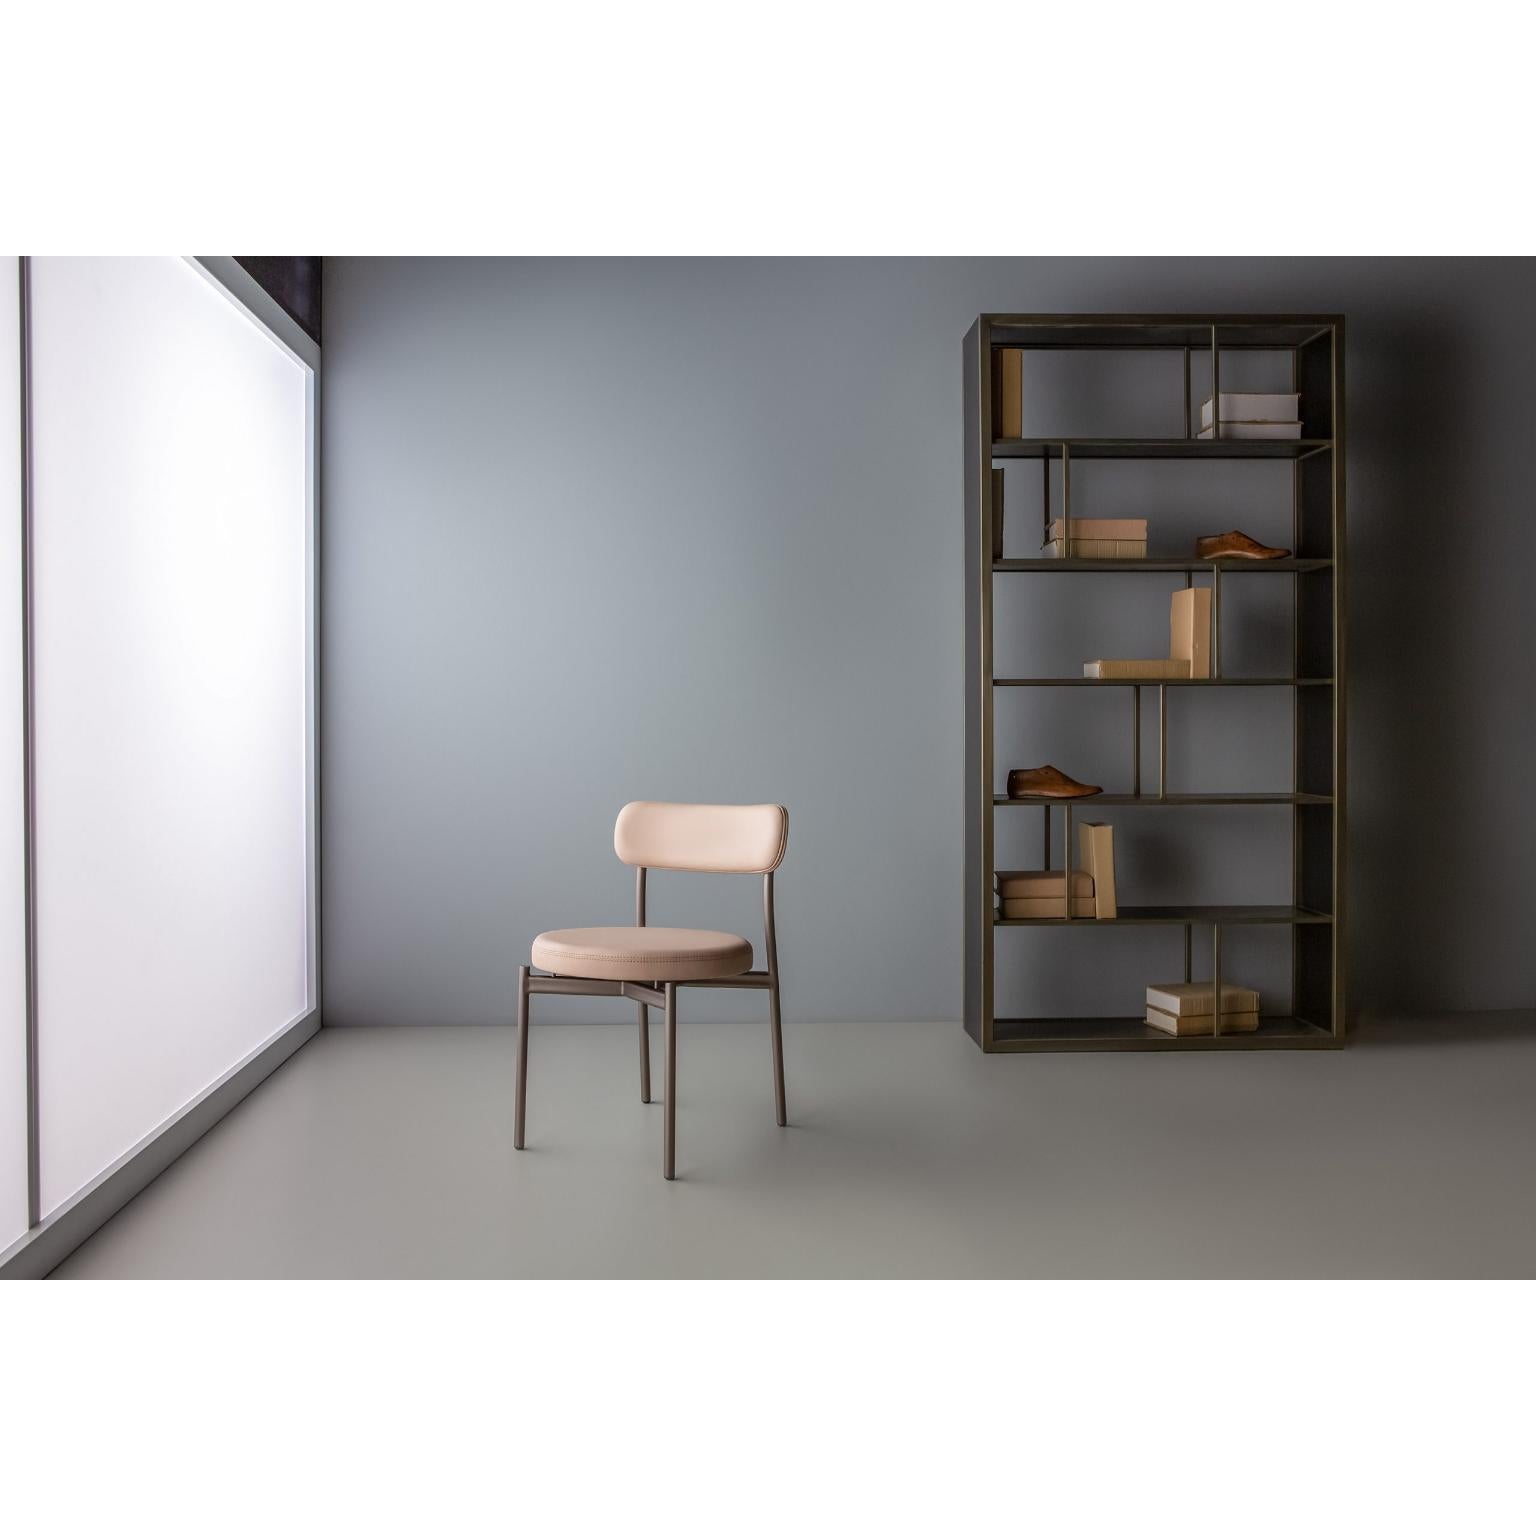 Jean Pri Chair by Doimo Brasil
Dimensions: W 49 x D 53 x H 72 cm 
Materials: Metal, Upholstered seat.


With the intention of providing good taste and personality, Doimo deciphers trends and follows the evolution of man and his space. To this end,